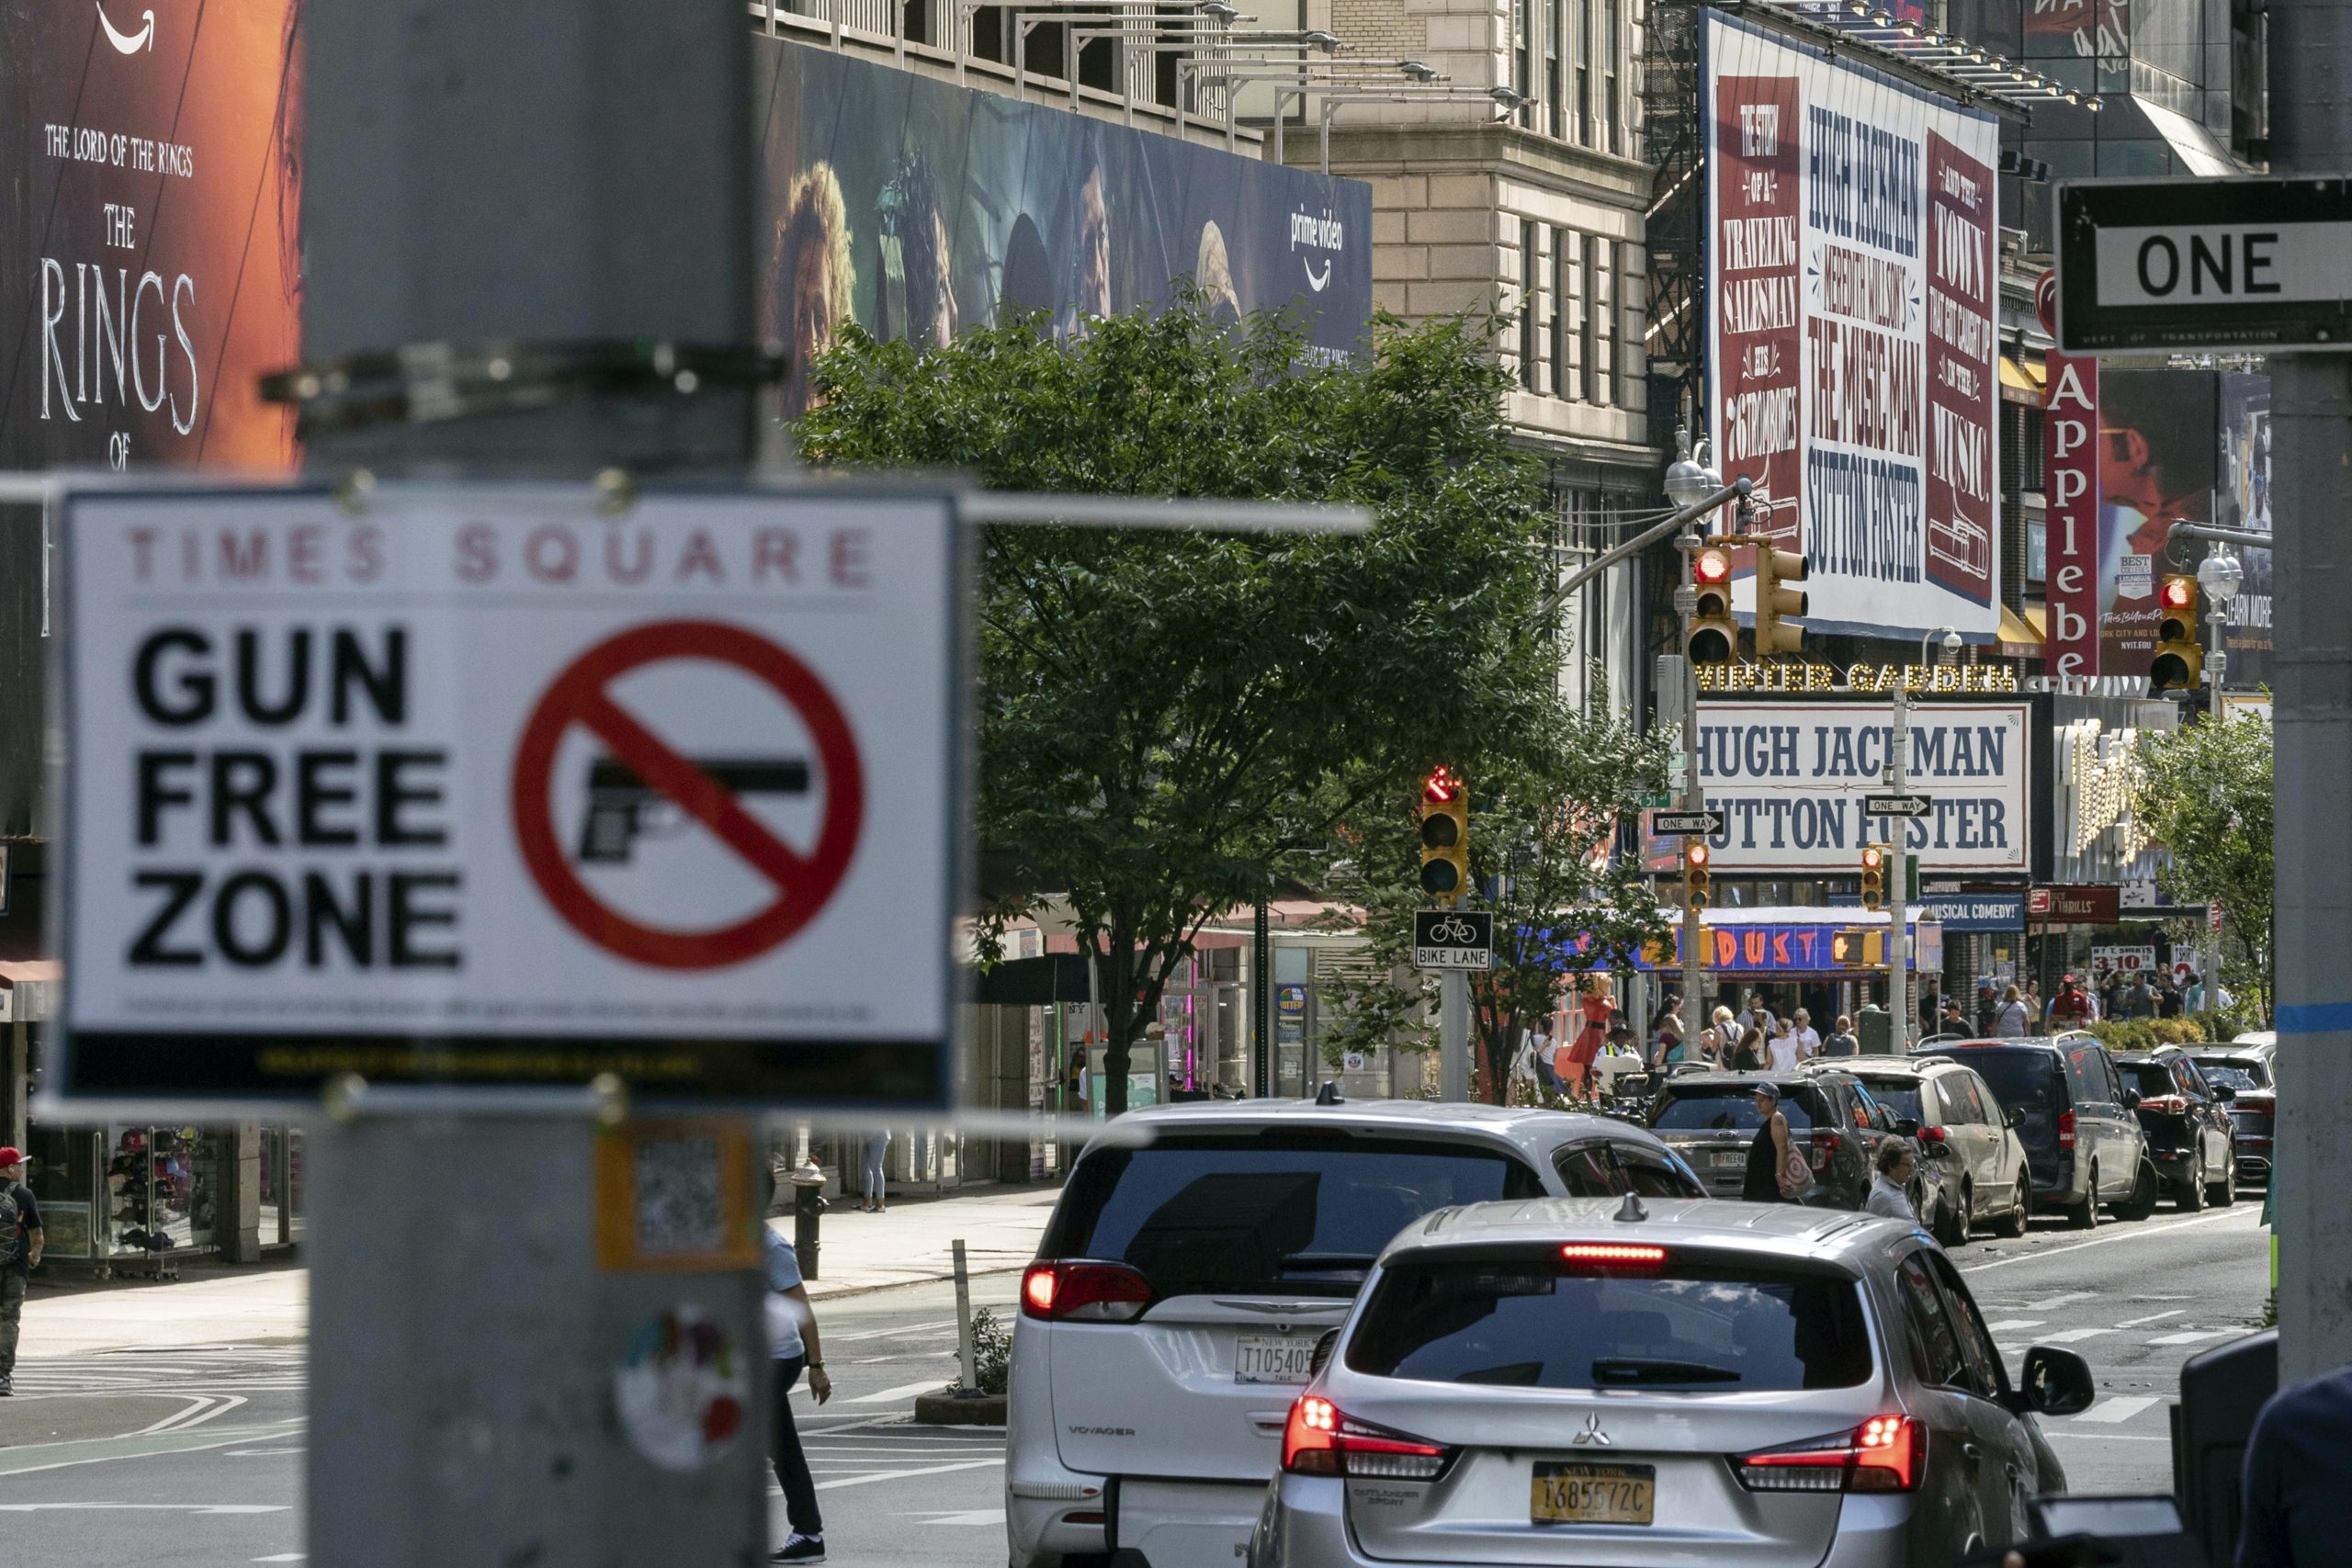 A "Gun Free Zone" sign is posted near New York City's Times Square in this file photo from August. A federal judge said Thursday that New York gun rules which dramatically restrict where people can carry weapons and require concealed carry permit applicants to hand over social media information should be put on hold.